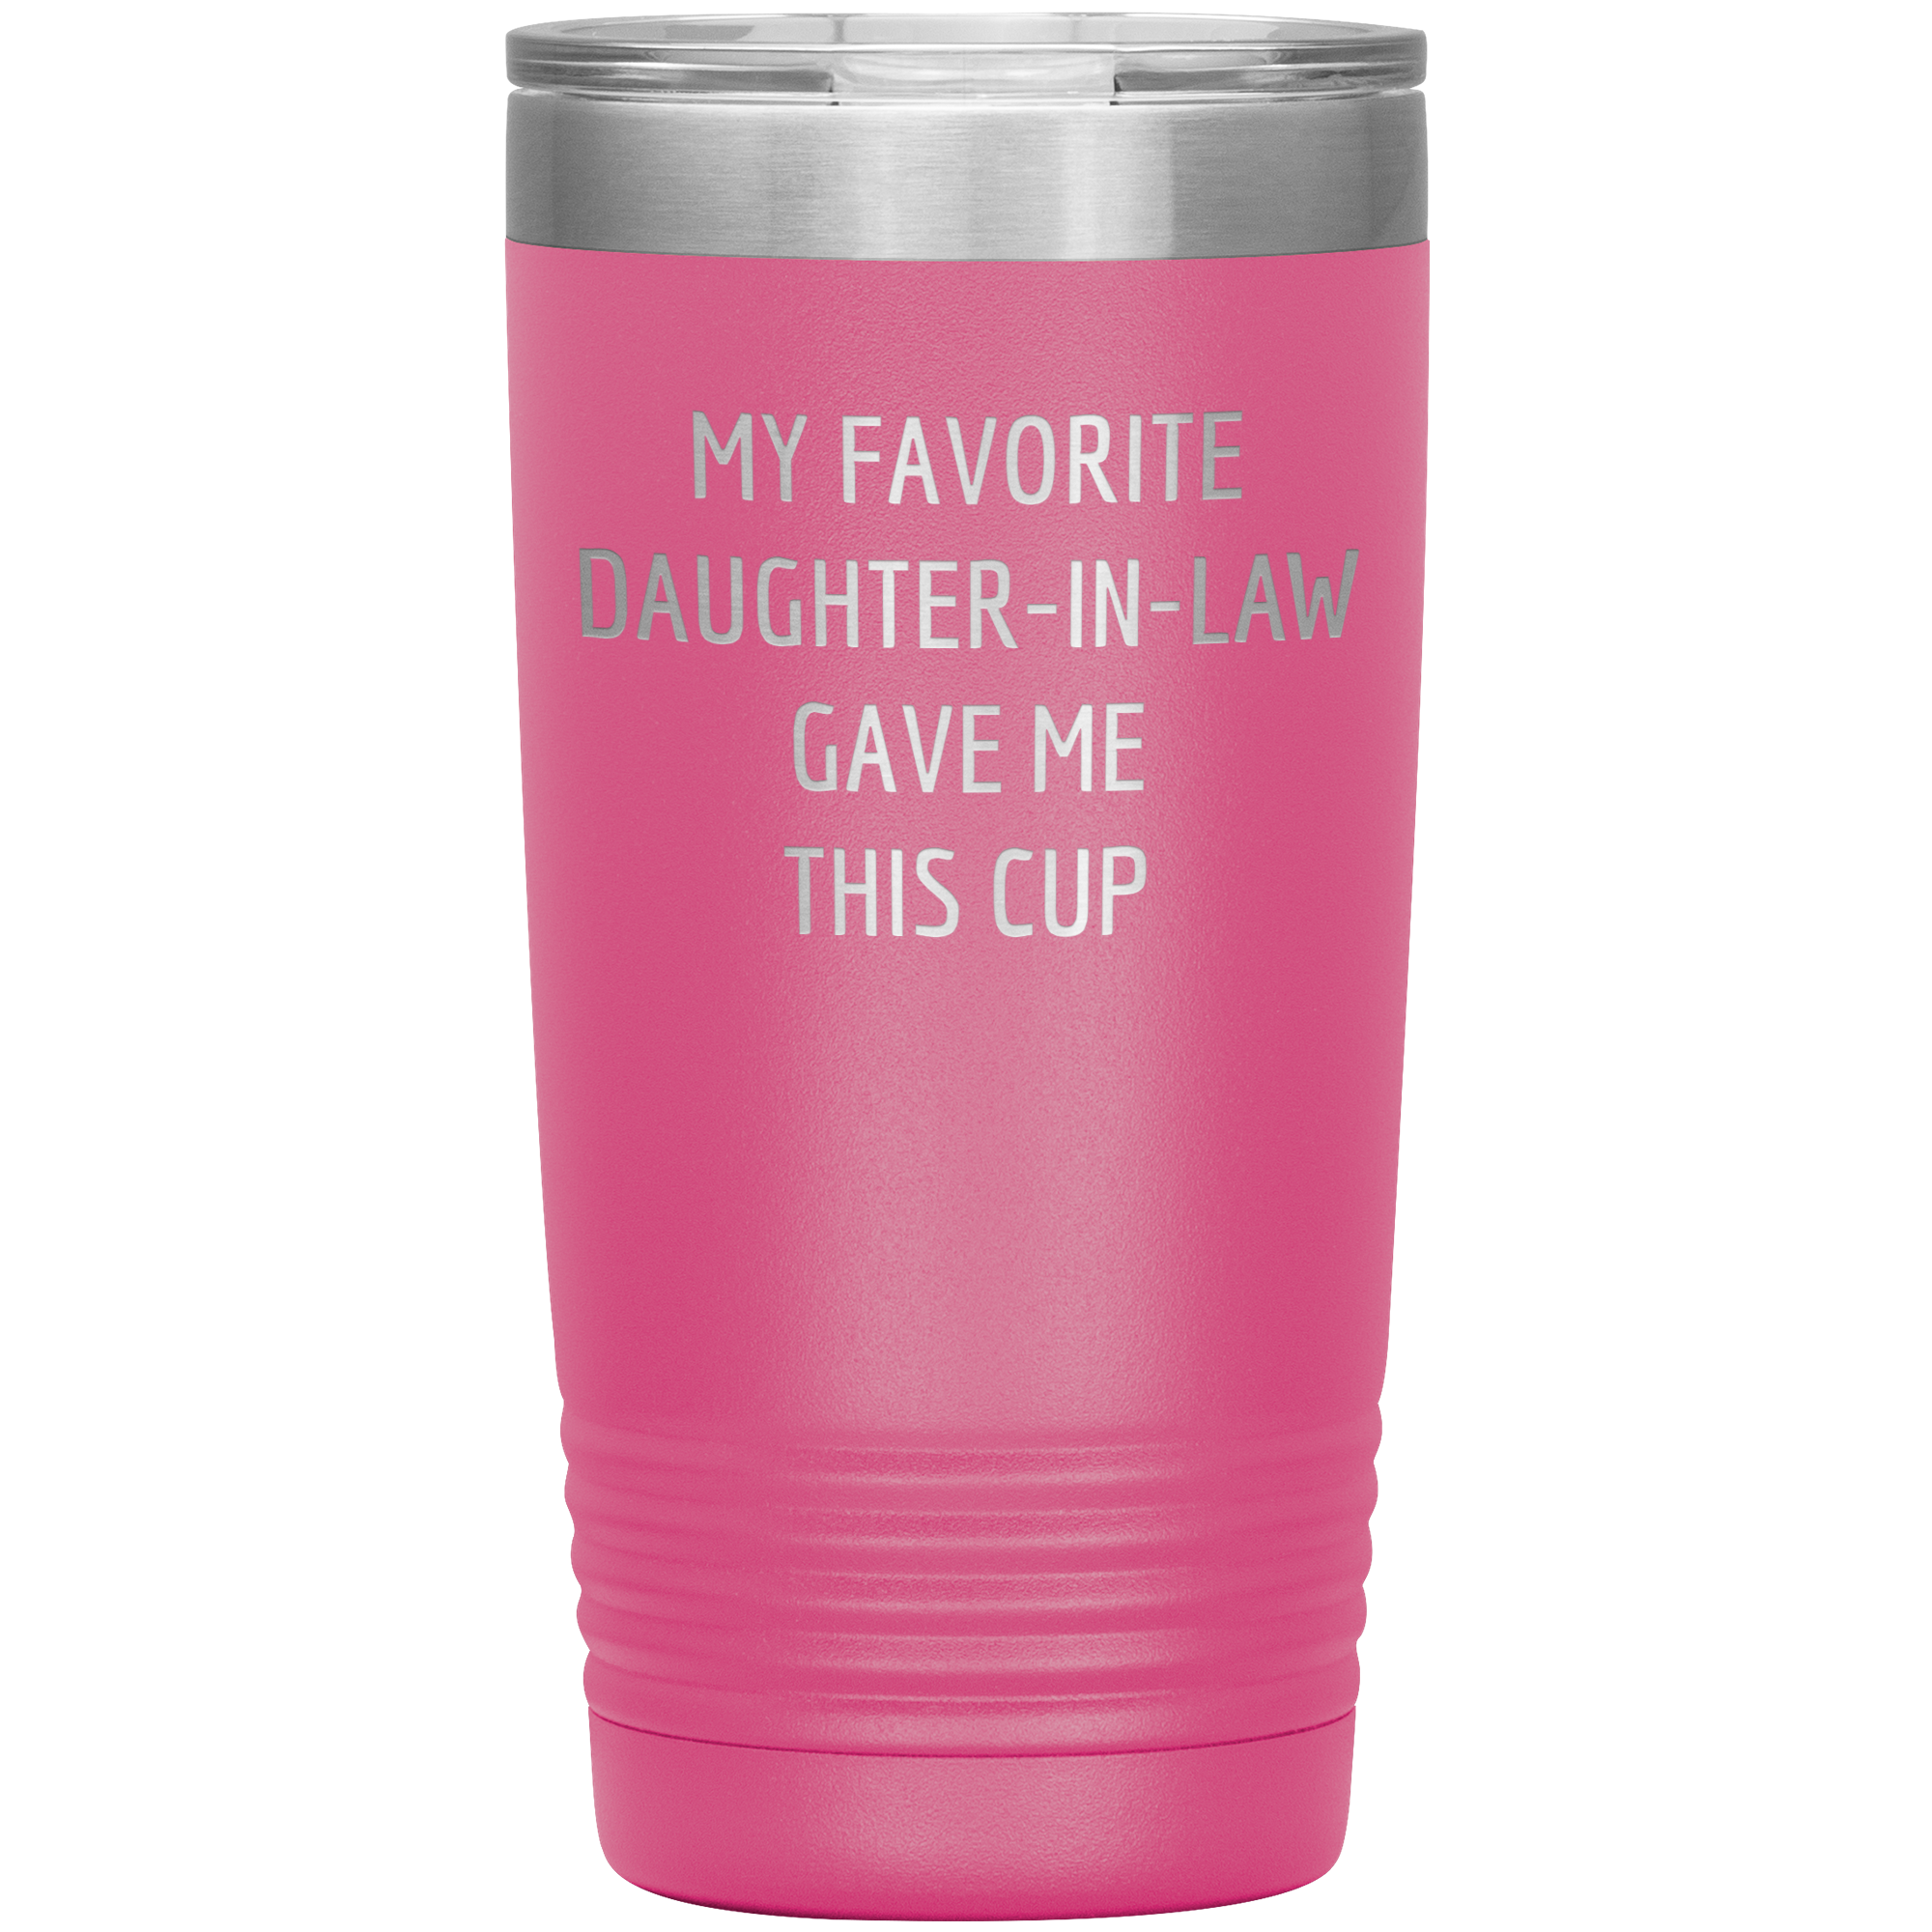 Funny Father In Law Tumbler